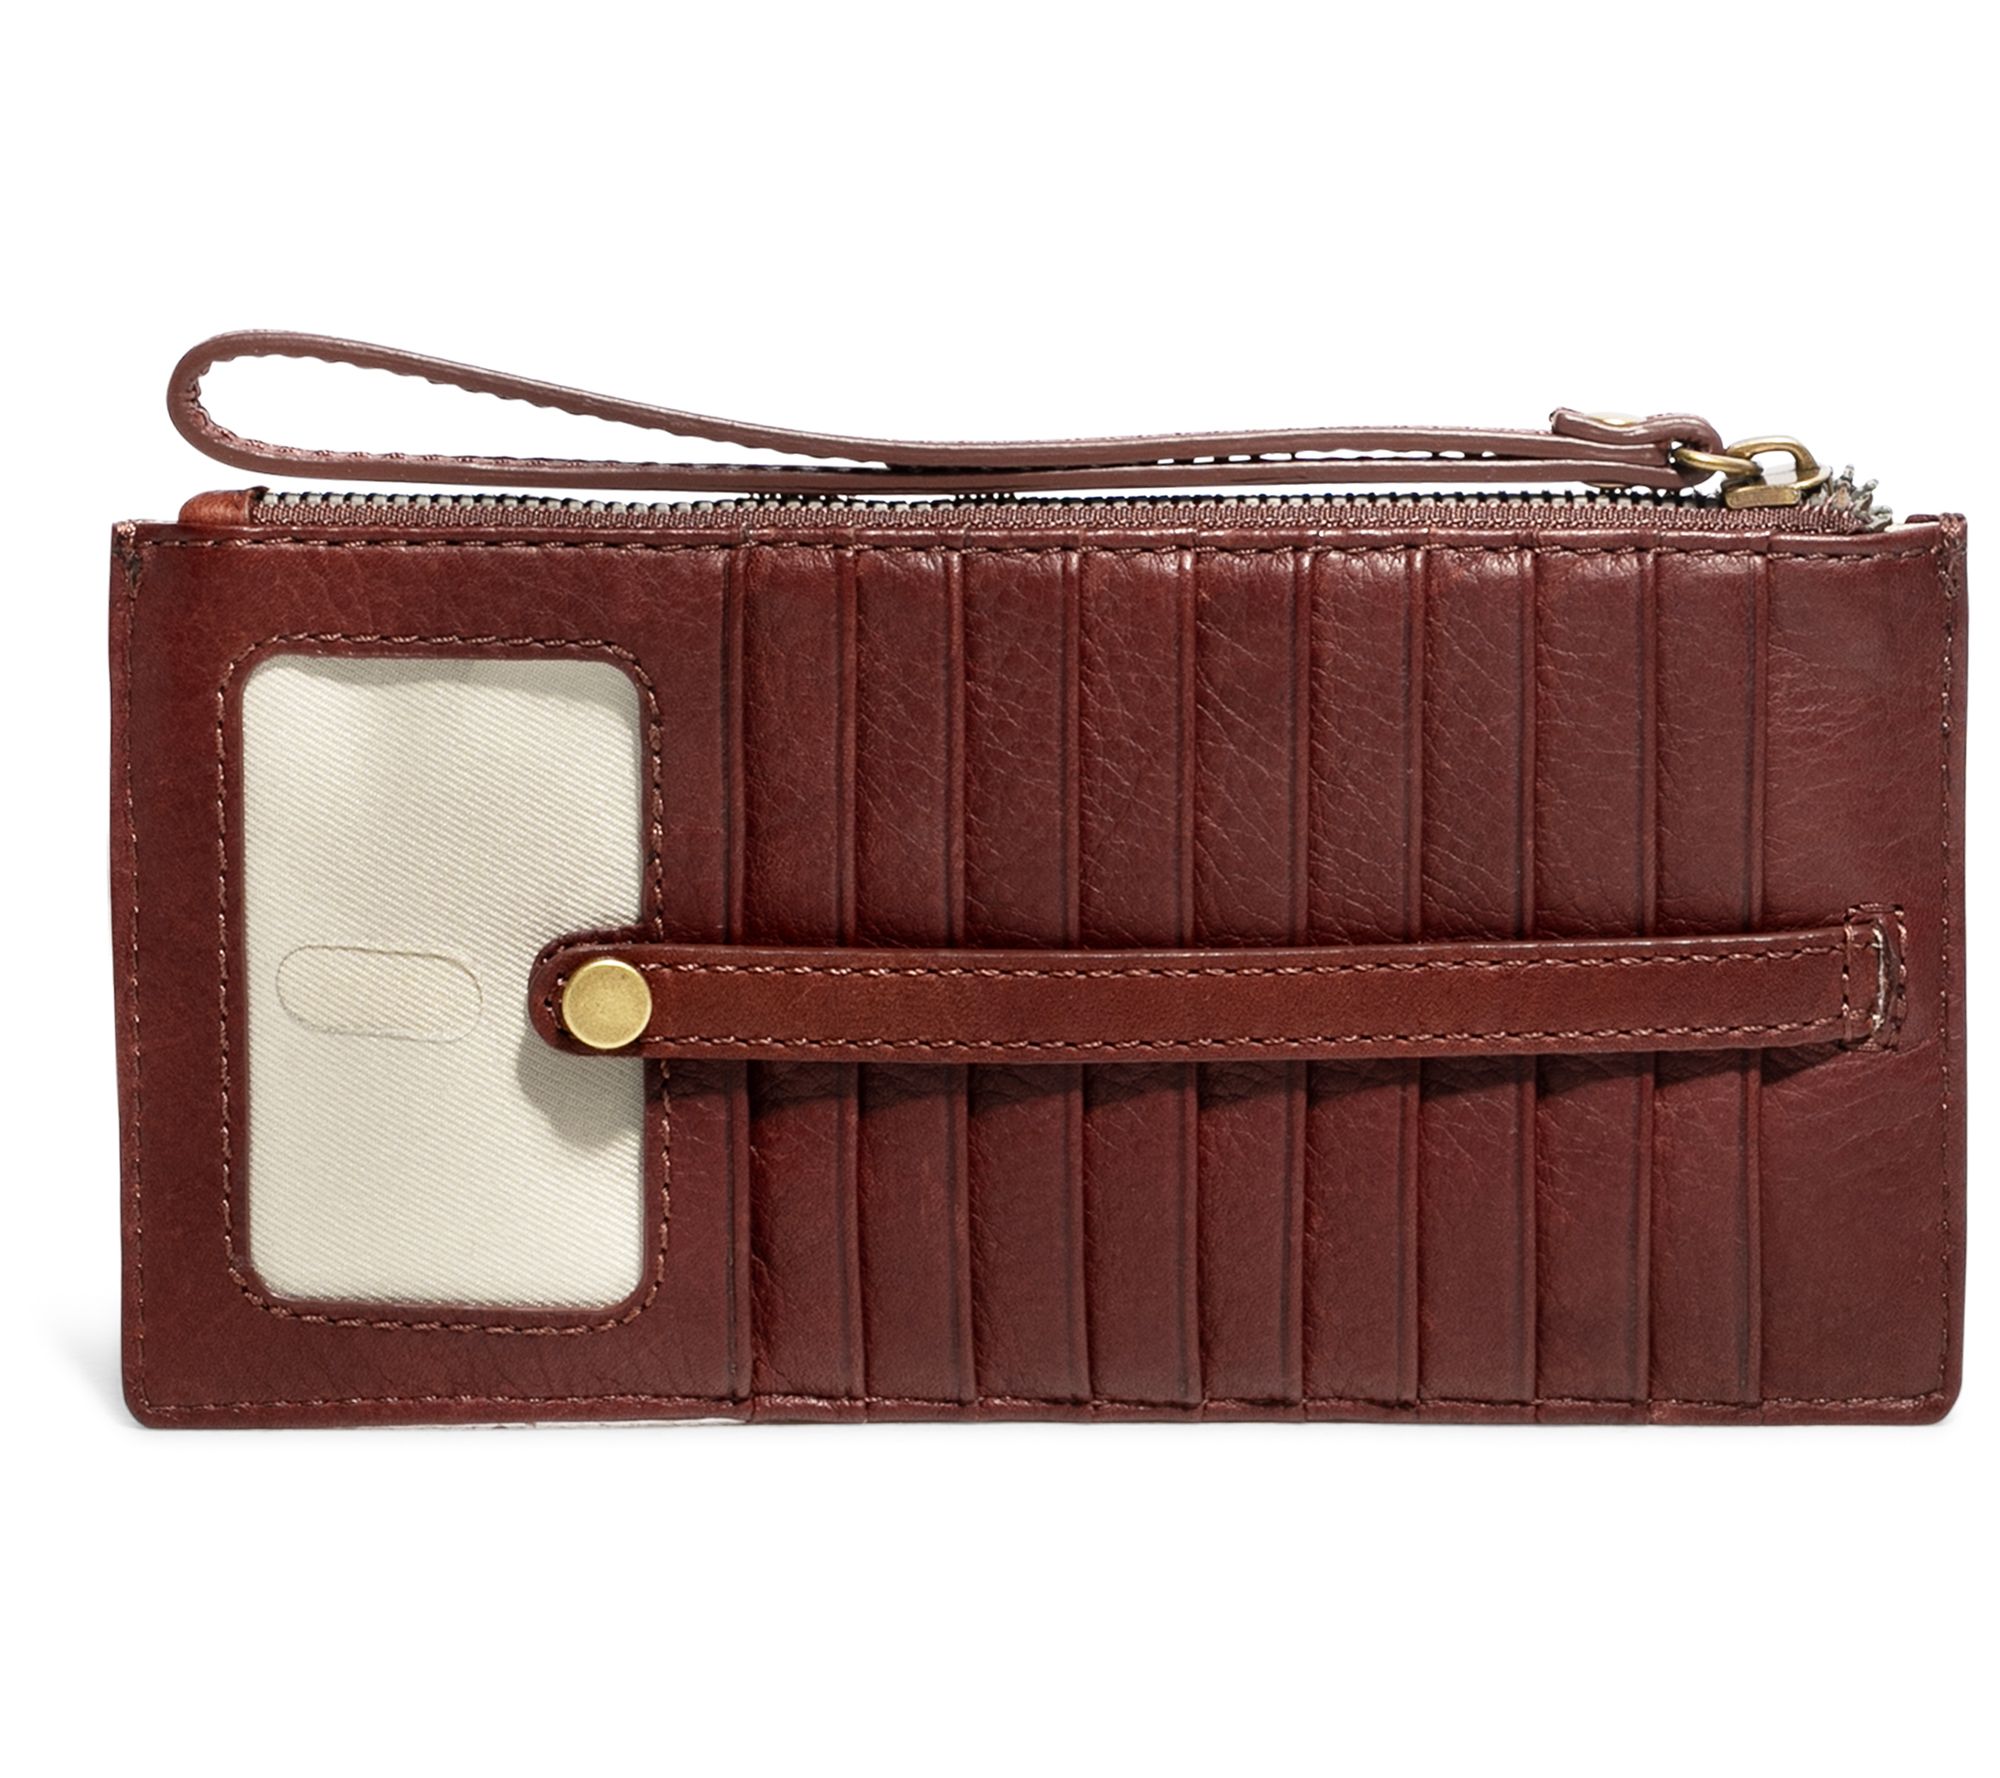 American Leather Co. Bristow CC Zip Leather Wallet Wristlet 